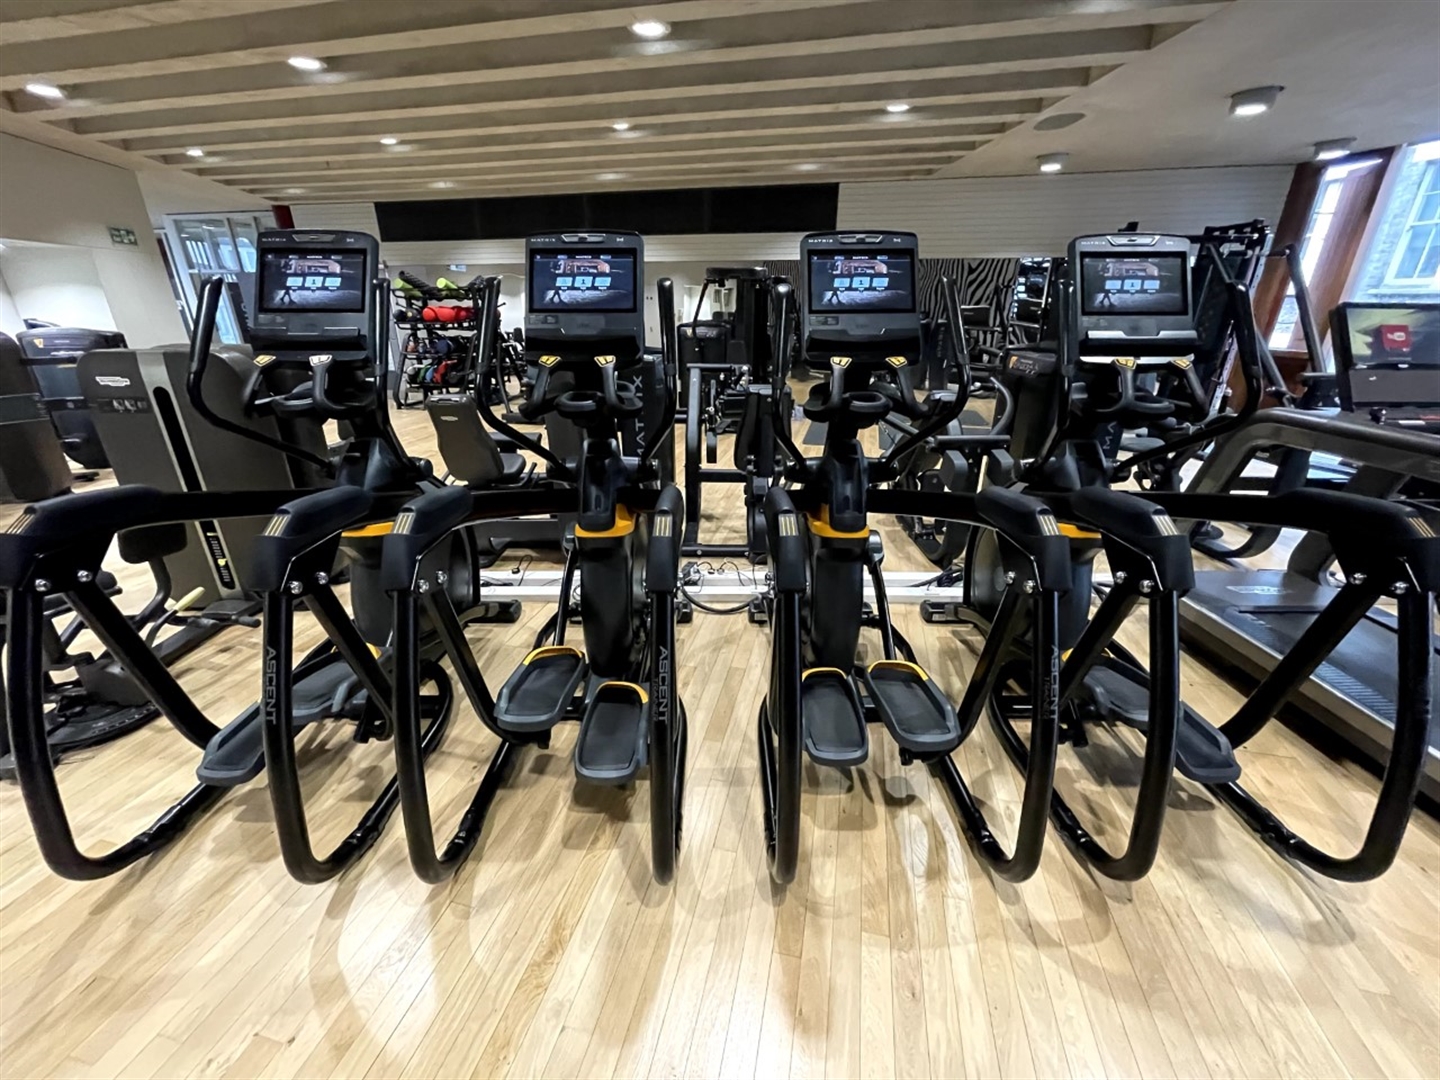 LSESU Level Up Fitness is open exclusively to LSE Students, Staff and Alumni. Based across two sites, we aim to keep prices low and provide an excellent service that suits your needs.